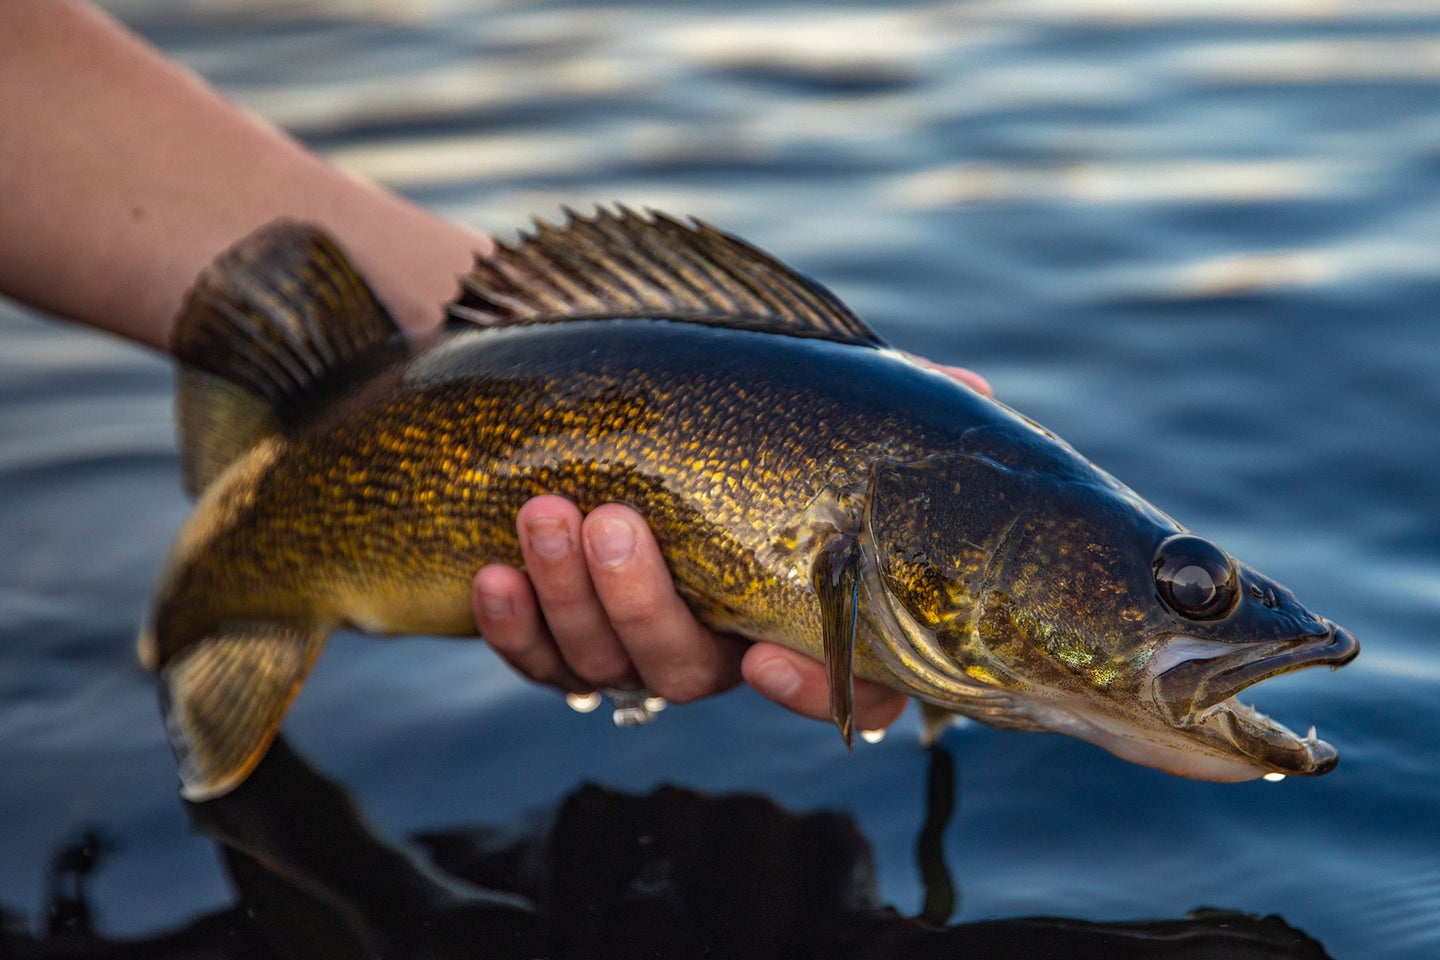 Walleyes can lay up to 300,000 eggs a year and eat more than 2 young salmon a day.